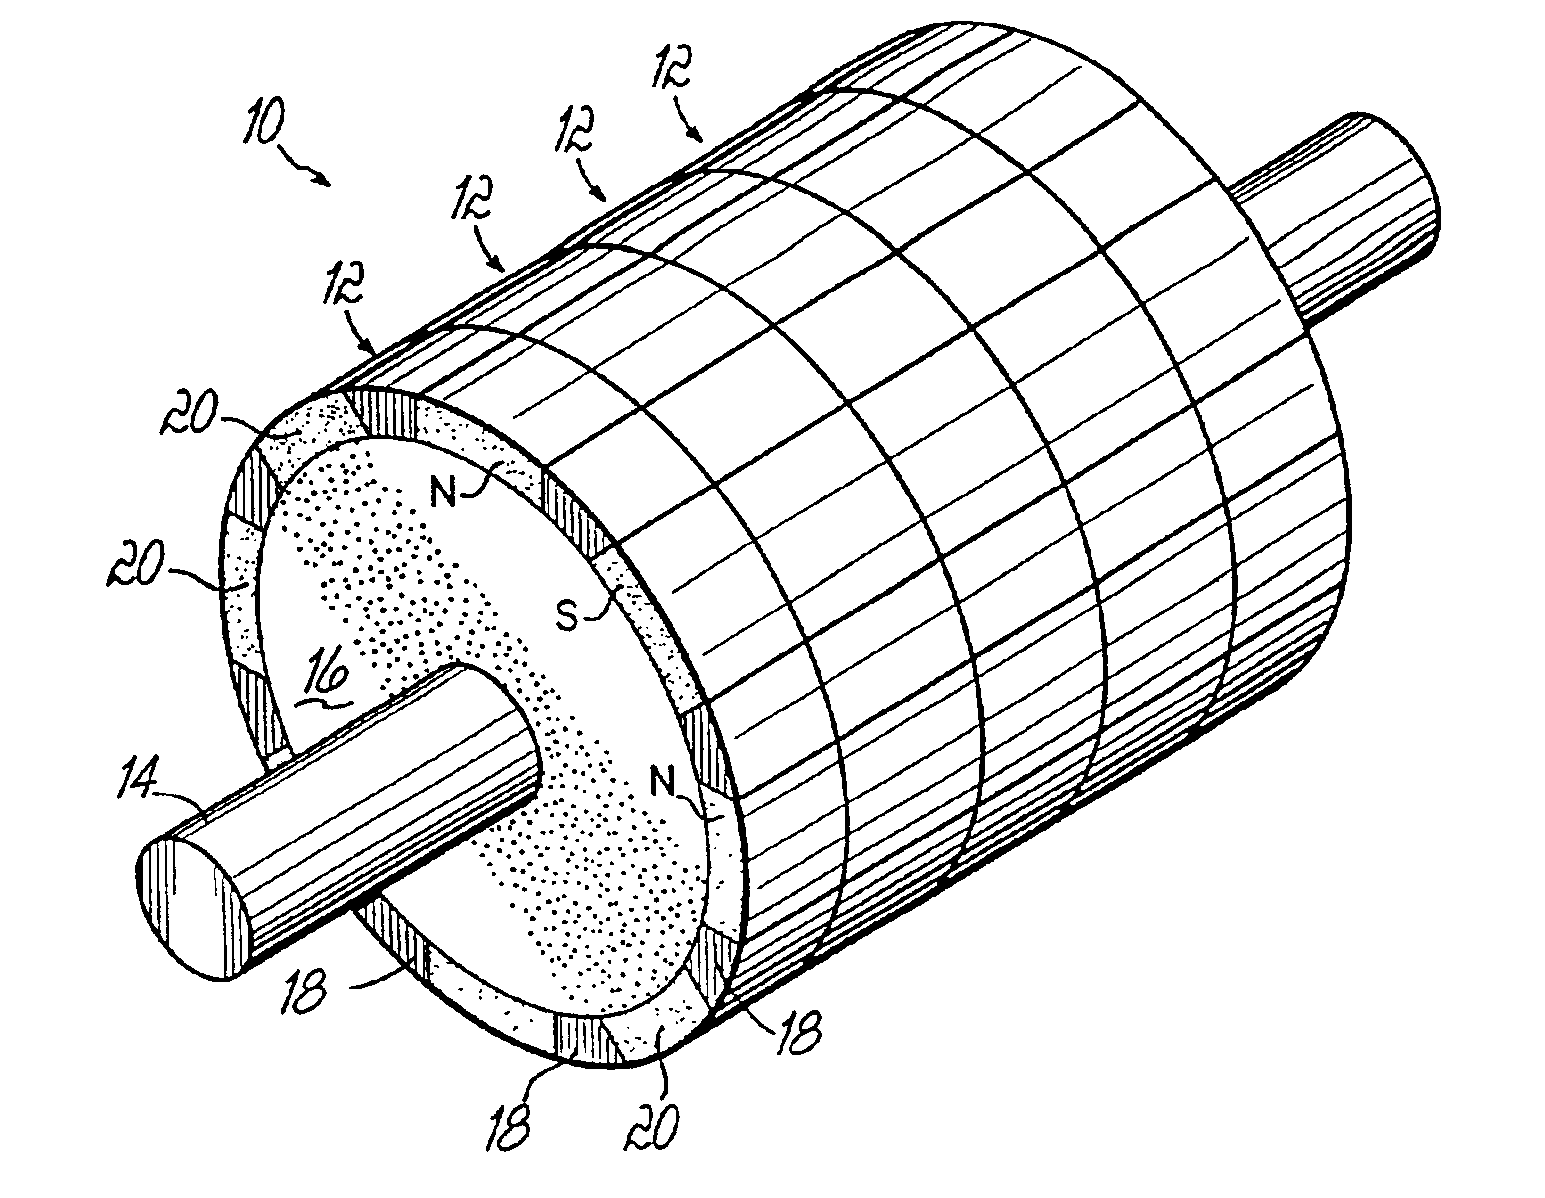 Method of making a composite electric machine component of a desired magnetic pattern